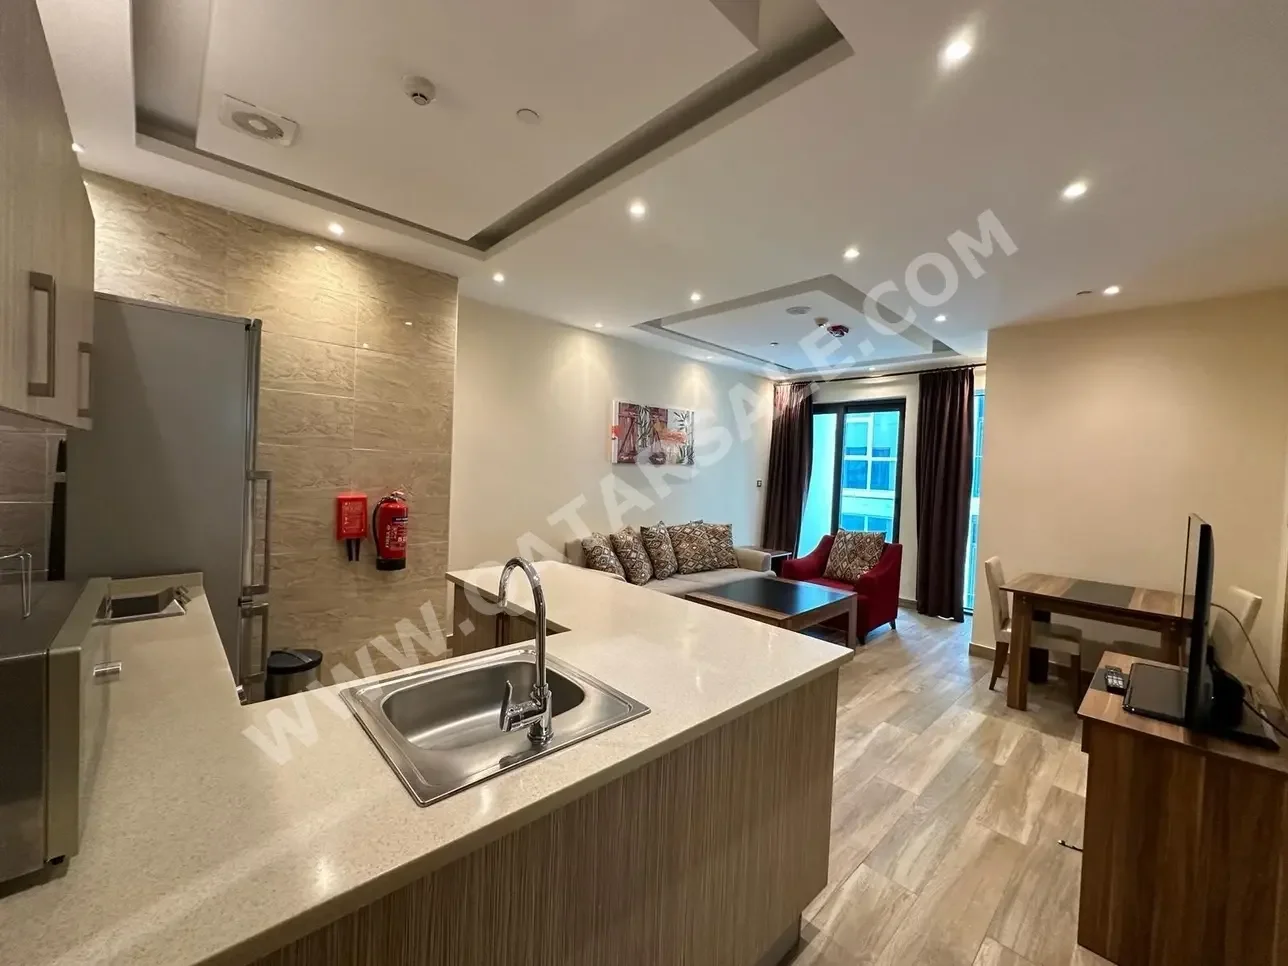 1 Bedrooms  Apartment  For Rent  Doha -  Al Sadd  Fully Furnished